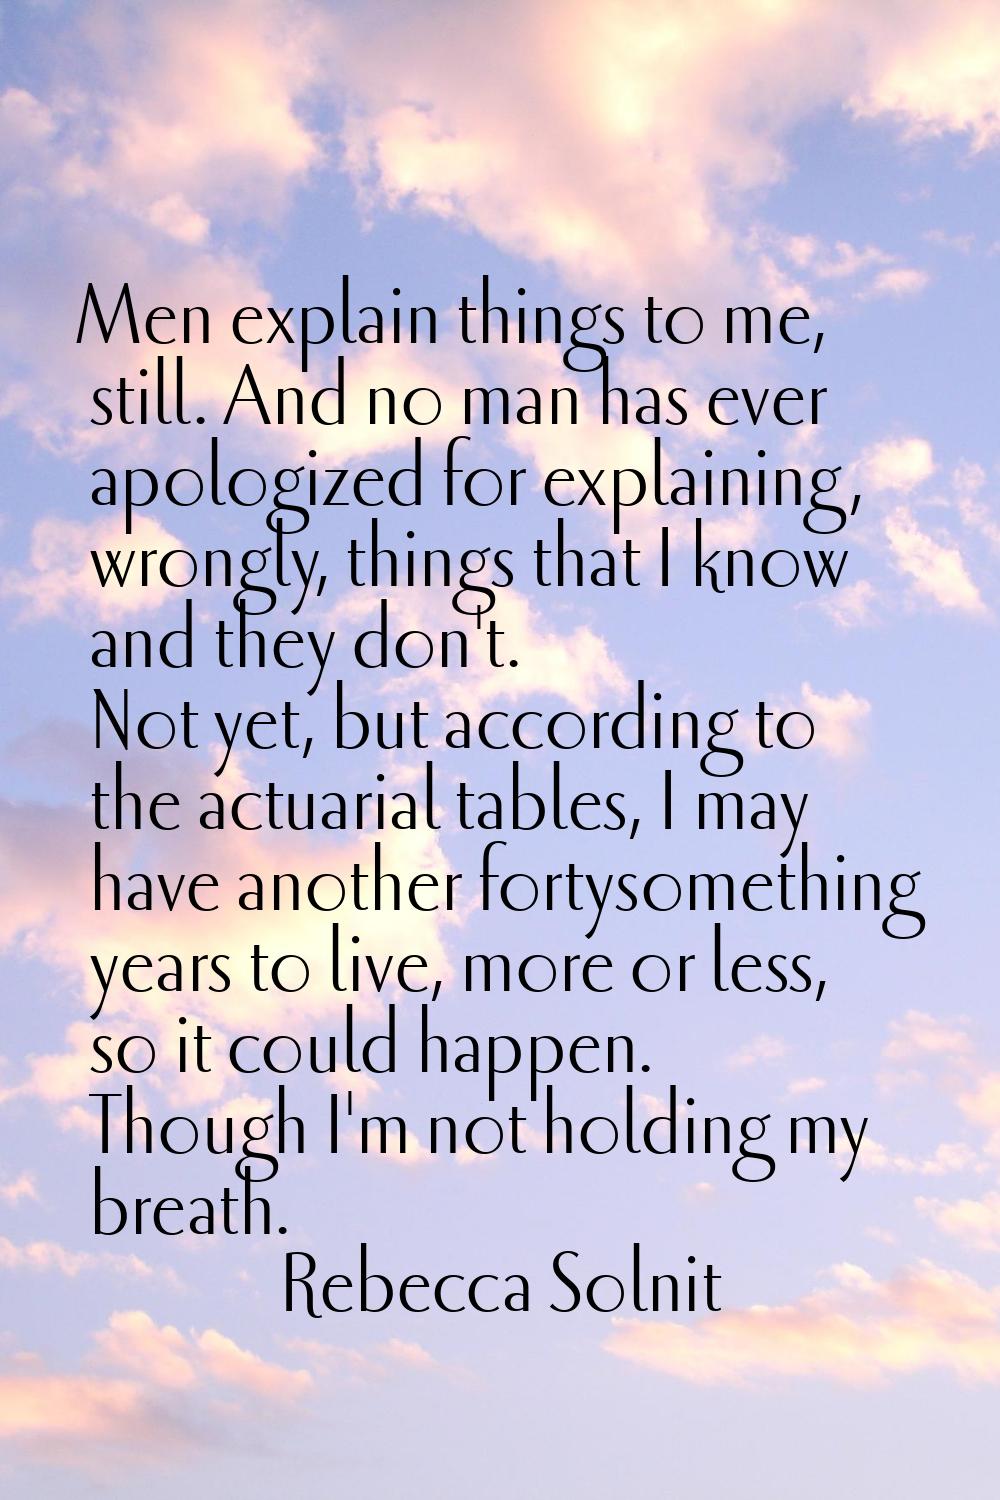 Men explain things to me, still. And no man has ever apologized for explaining, wrongly, things tha